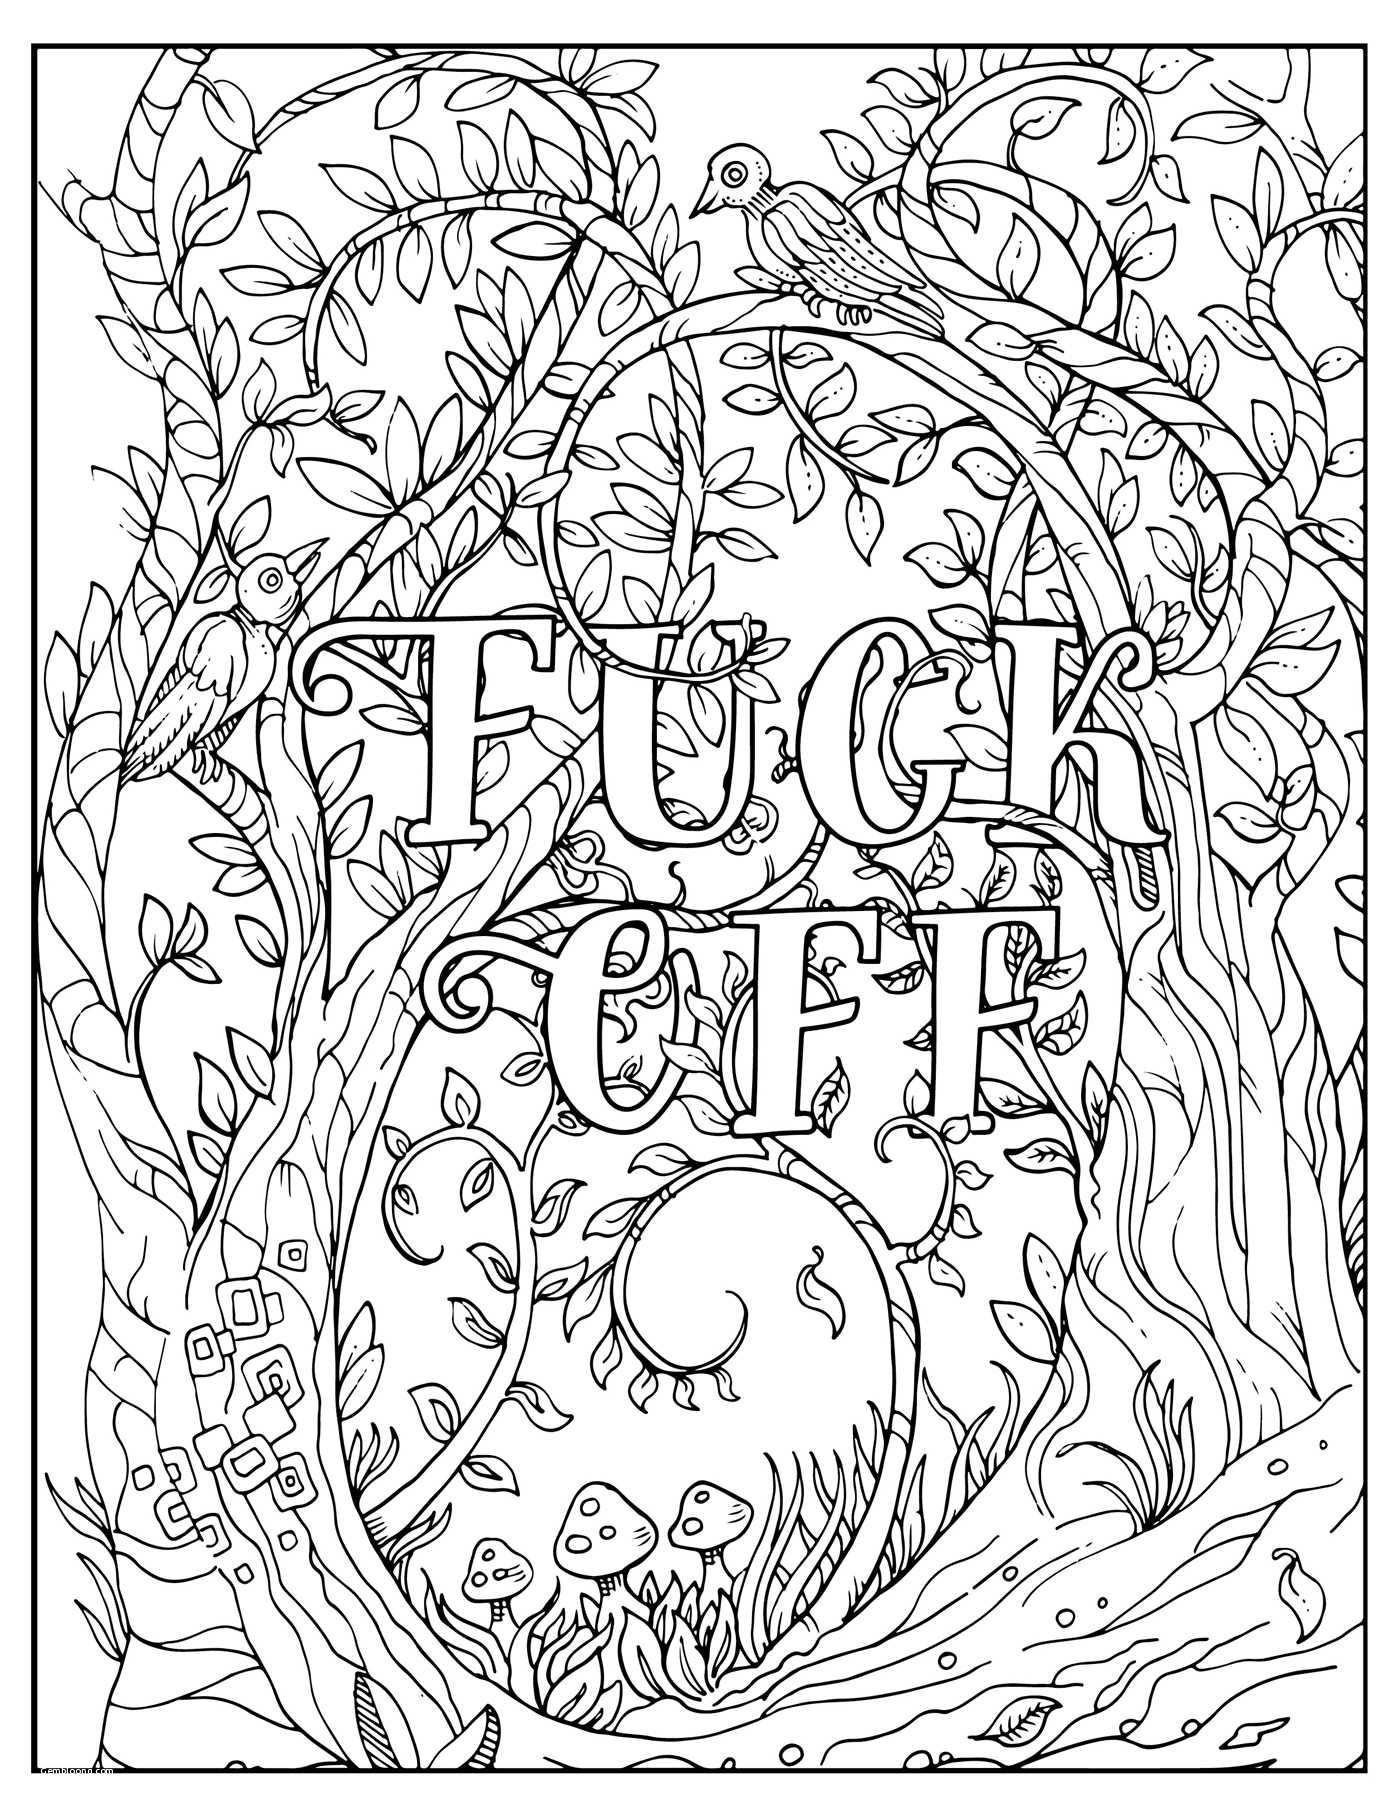 coloring pages : Coloring Pages With Swear Words New Adult Coloring Pages  Swear Words Coloring Pages with Swear Words ~ affiliateprogrambook.com